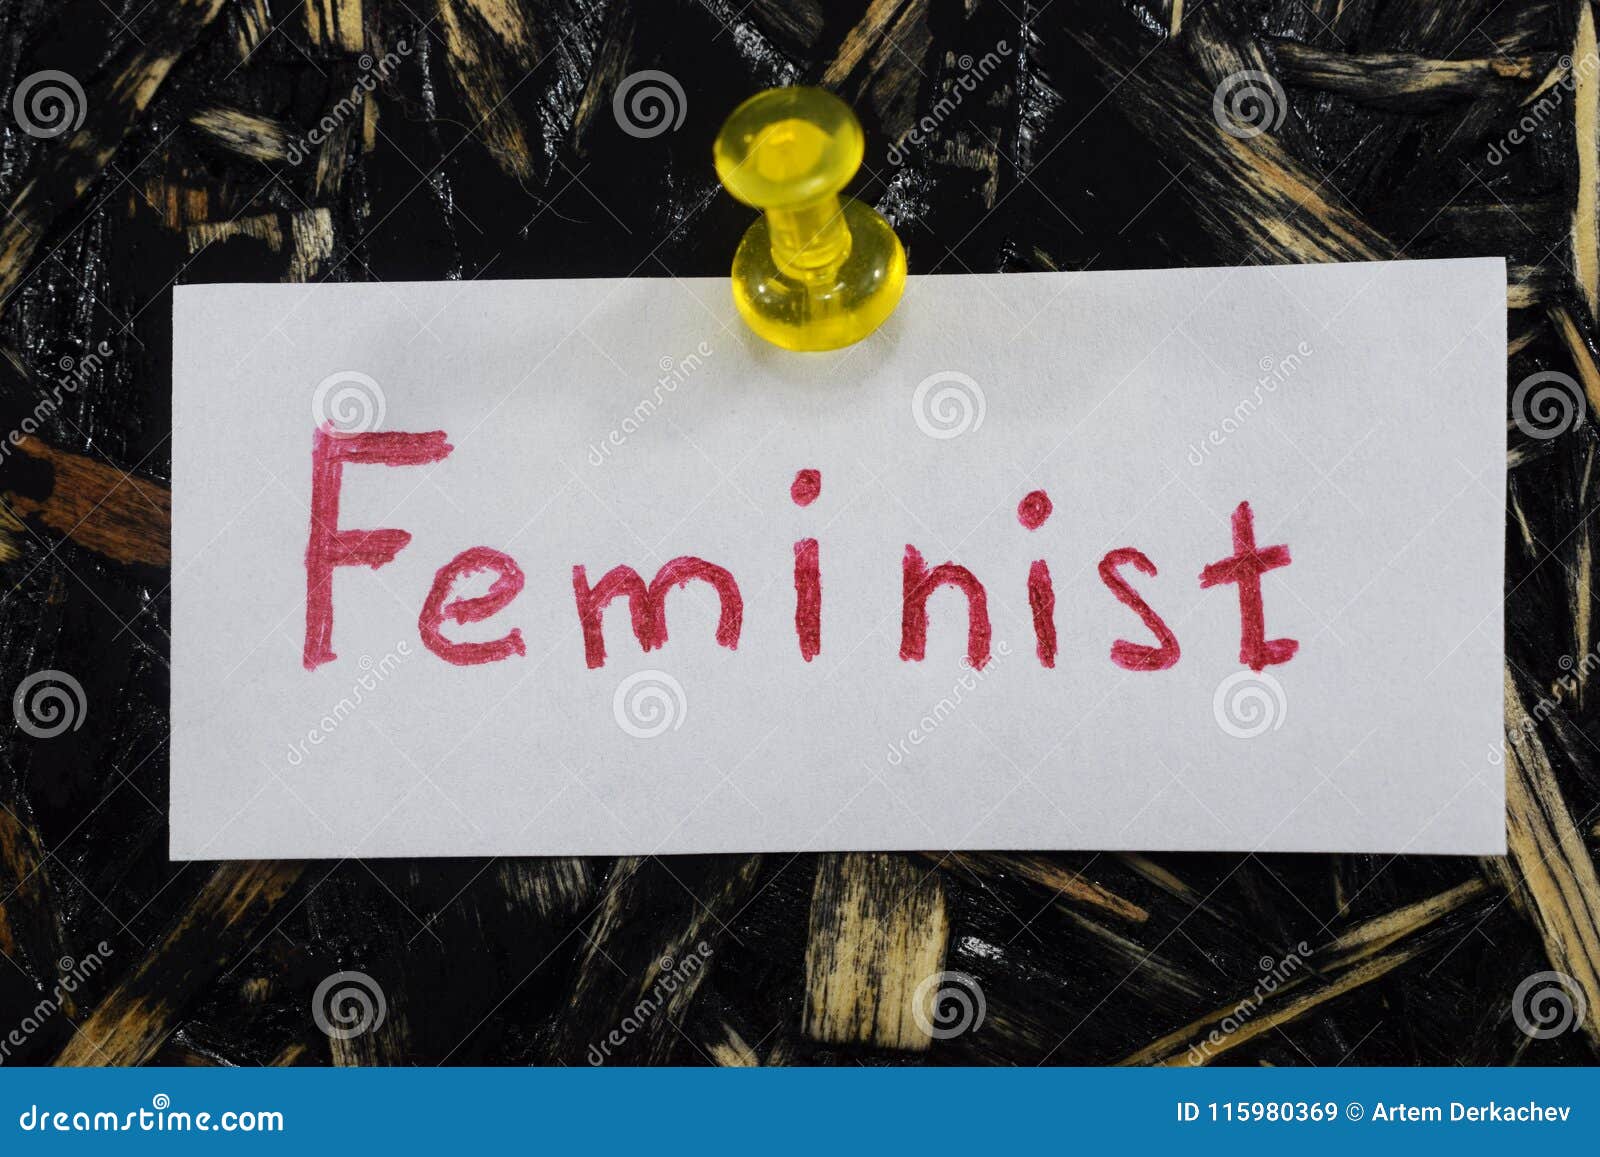 a simple and understandable inscription, feminist